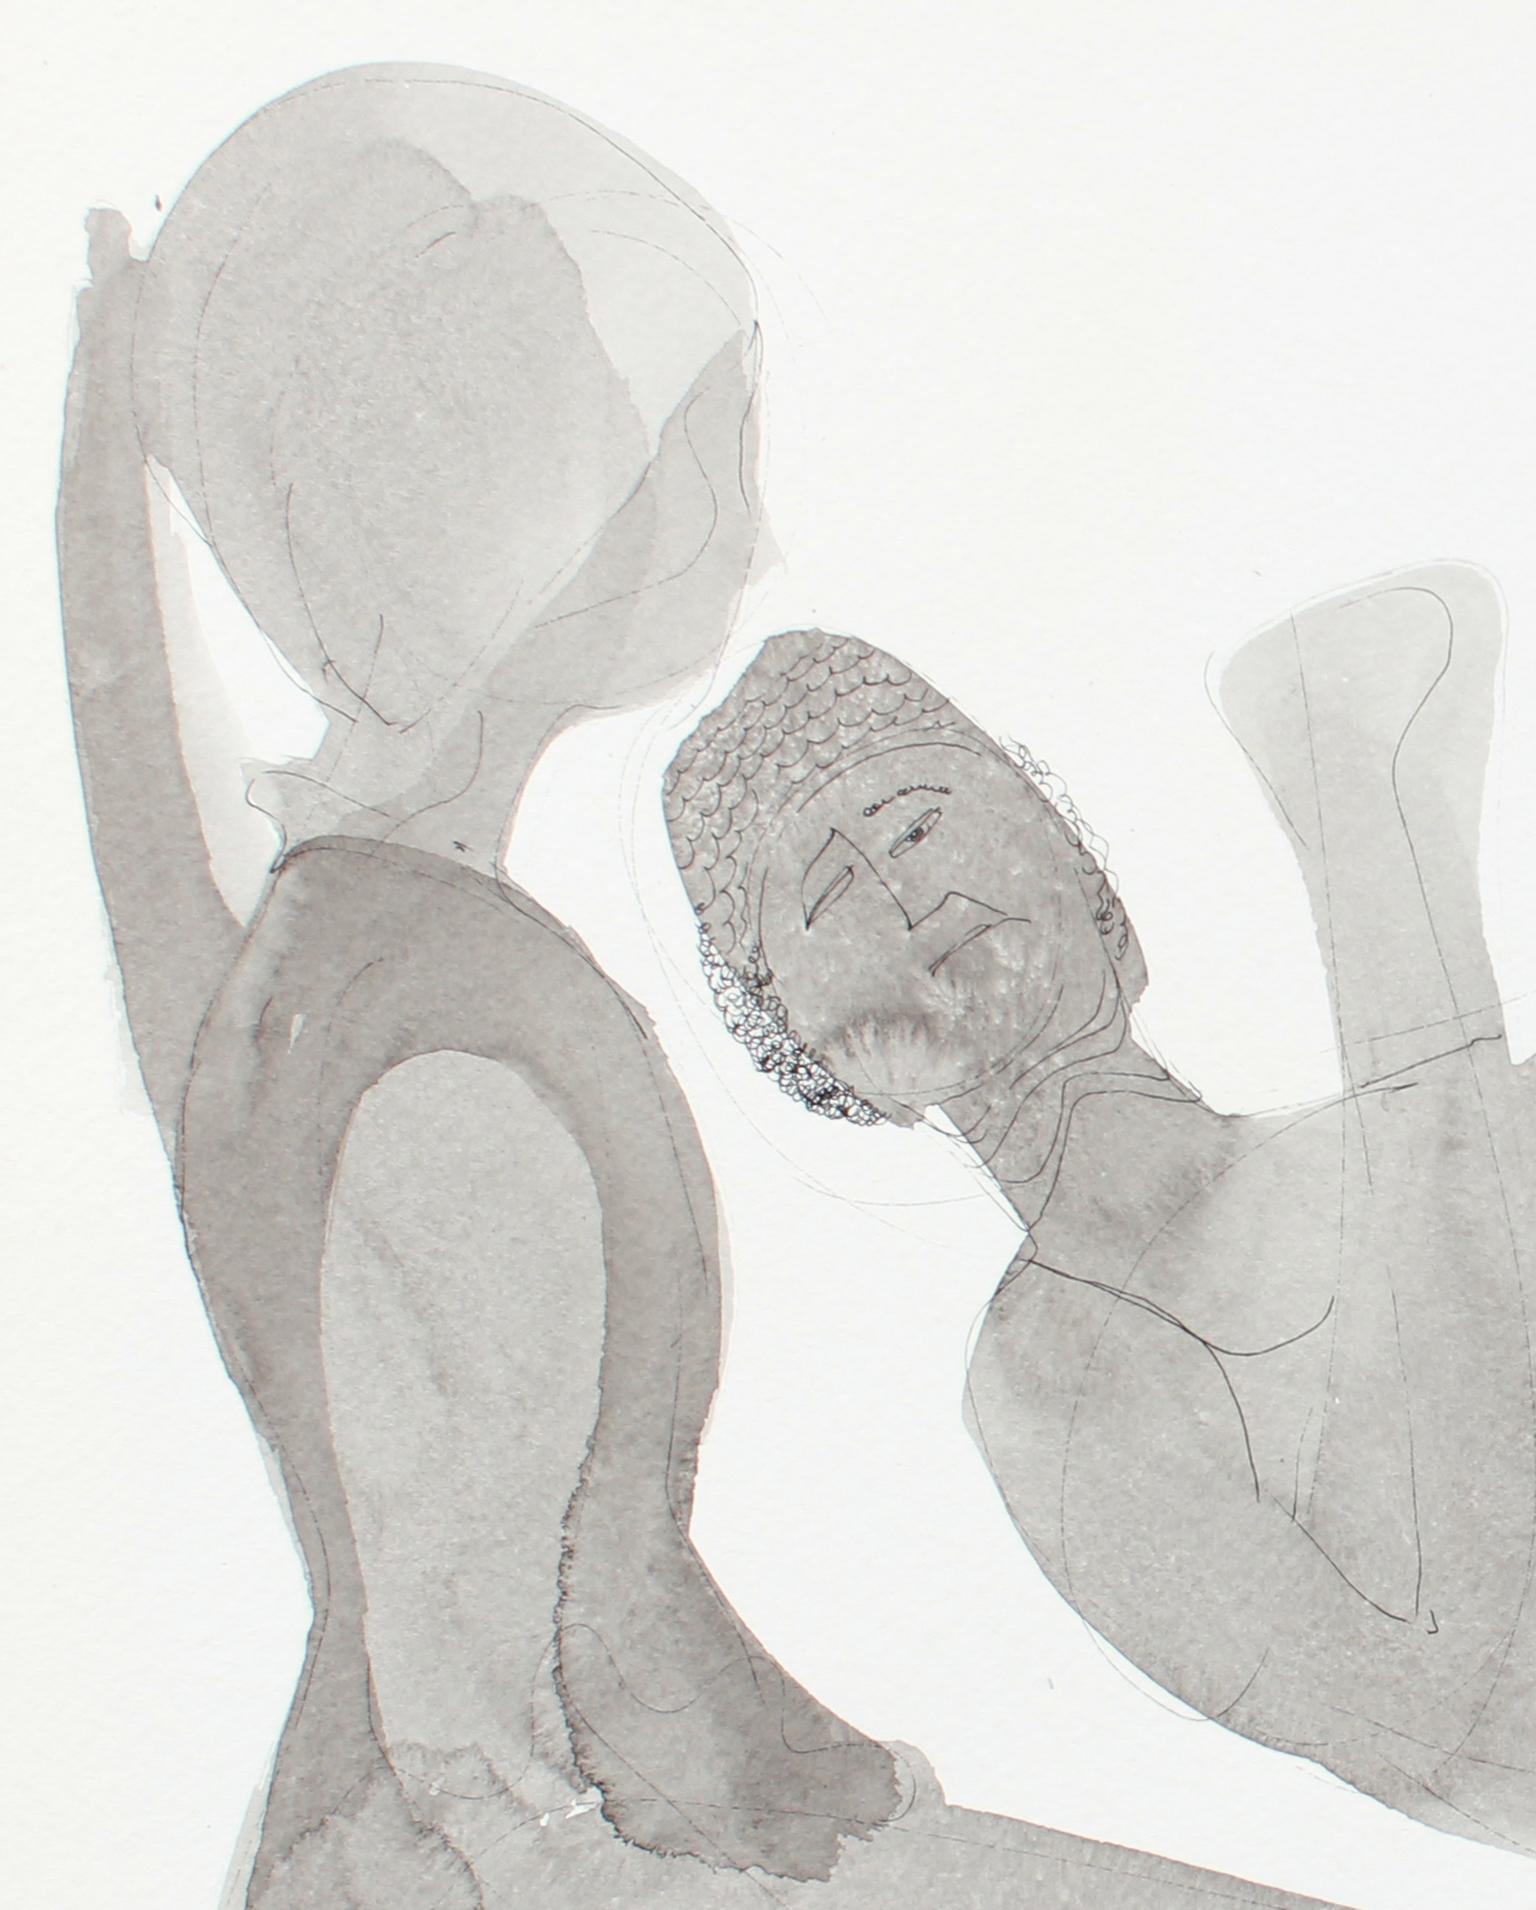 Monochromatic Relaxed Couple Silhouetted in Ink on Paper, 1960-80s  - Art by Morris Kronfeld